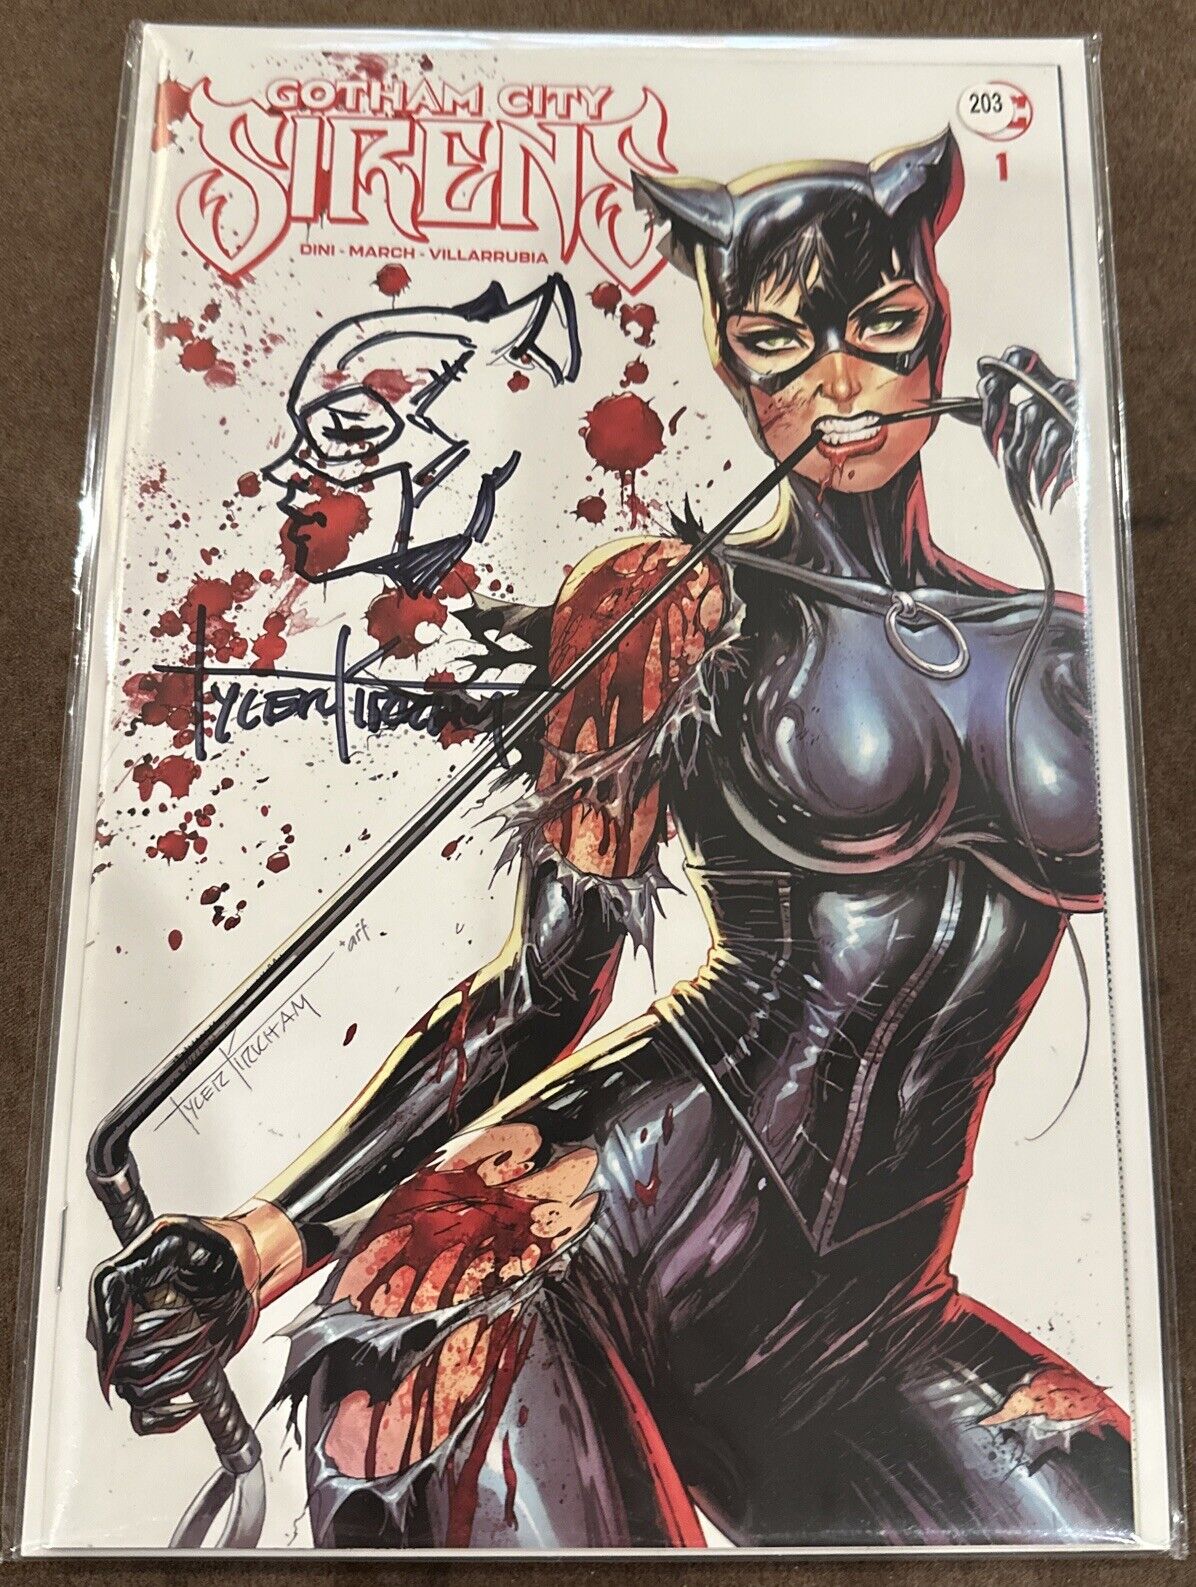 Gotham City Sirens #1- Tyler Kirkham Catwoman Cover - * SIGNED WITH REMARK*